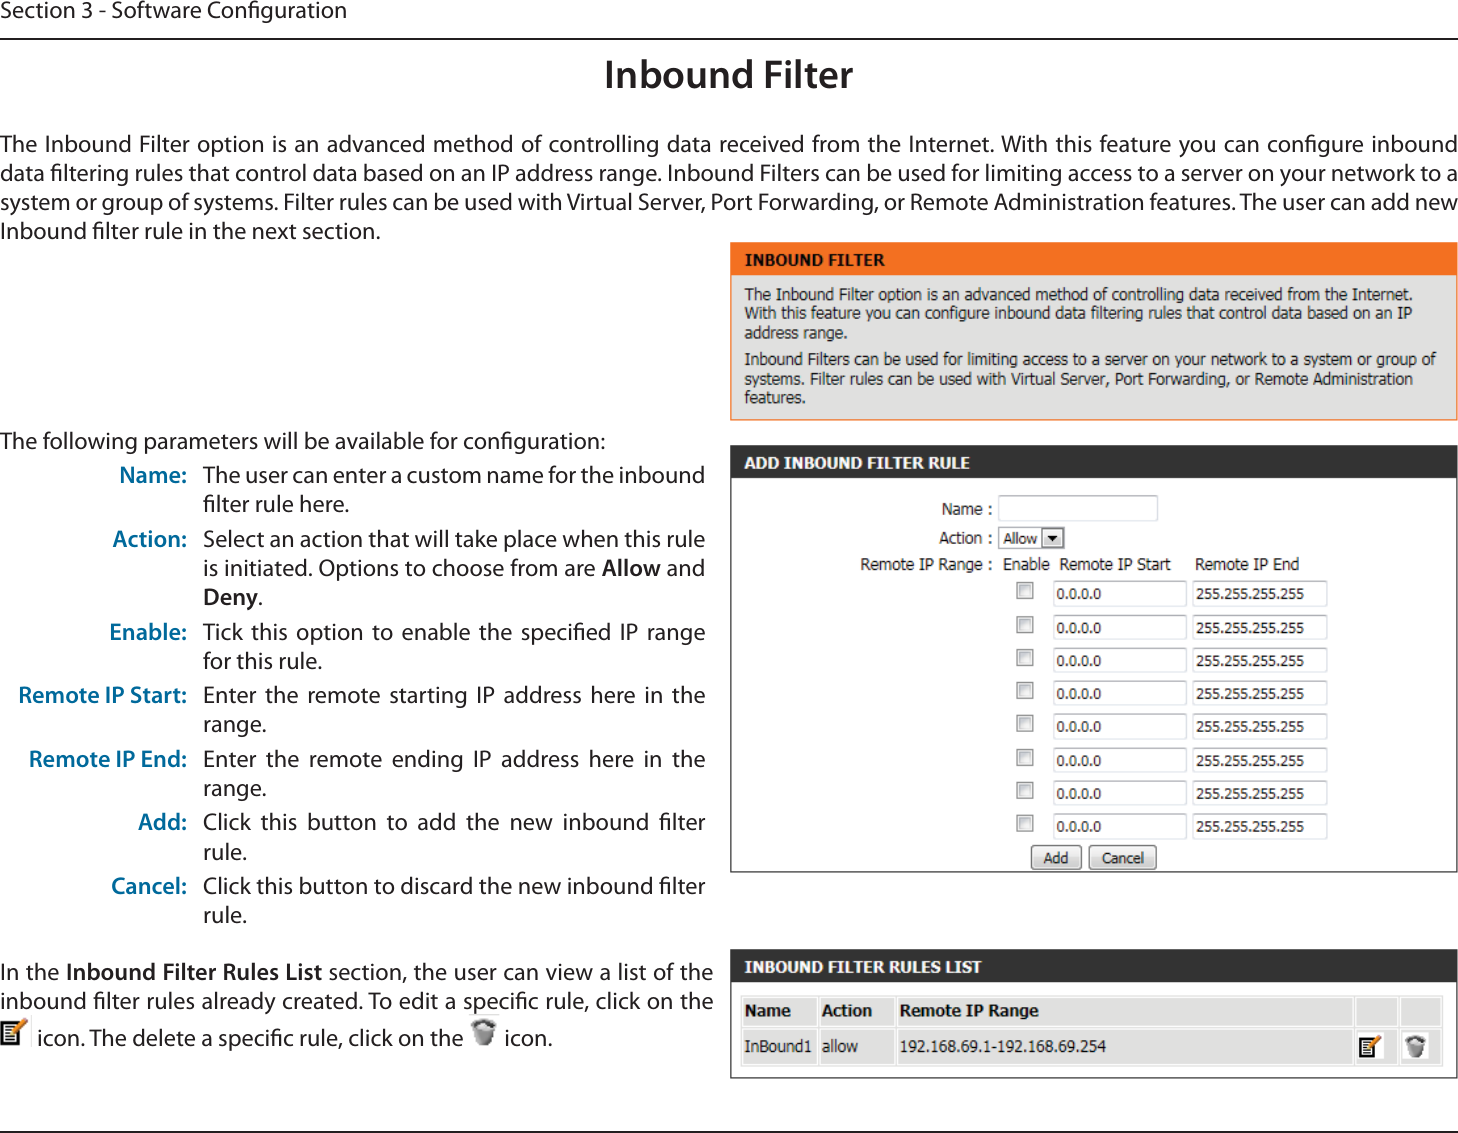 Section 3 - Software CongurationInbound FilterThe Inbound Filter option is an advanced method of controlling data received from the Internet. With this feature you can congure inbound data ltering rules that control data based on an IP address range. Inbound Filters can be used for limiting access to a server on your network to a system or group of systems. Filter rules can be used with Virtual Server, Port Forwarding, or Remote Administration features. The user can add new Inbound lter rule in the next section.The following parameters will be available for conguration:Name: The user can enter a custom name for the inbound lter rule here.Action: Select an action that will take place when this rule is initiated. Options to choose from are Allow and Deny.Enable: Tick this option to enable the specied IP range for this rule.Remote IP Start: Enter the remote starting IP address here in the range.Remote IP End: Enter the remote ending IP address here in the range.Add: Click this button to add the new inbound lter rule.Cancel: Click this button to discard the new inbound lter rule.In the Inbound Filter Rules List section, the user can view a list of the inbound lter rules already created. To edit a specic rule, click on the  icon. The delete a specic rule, click on the   icon.